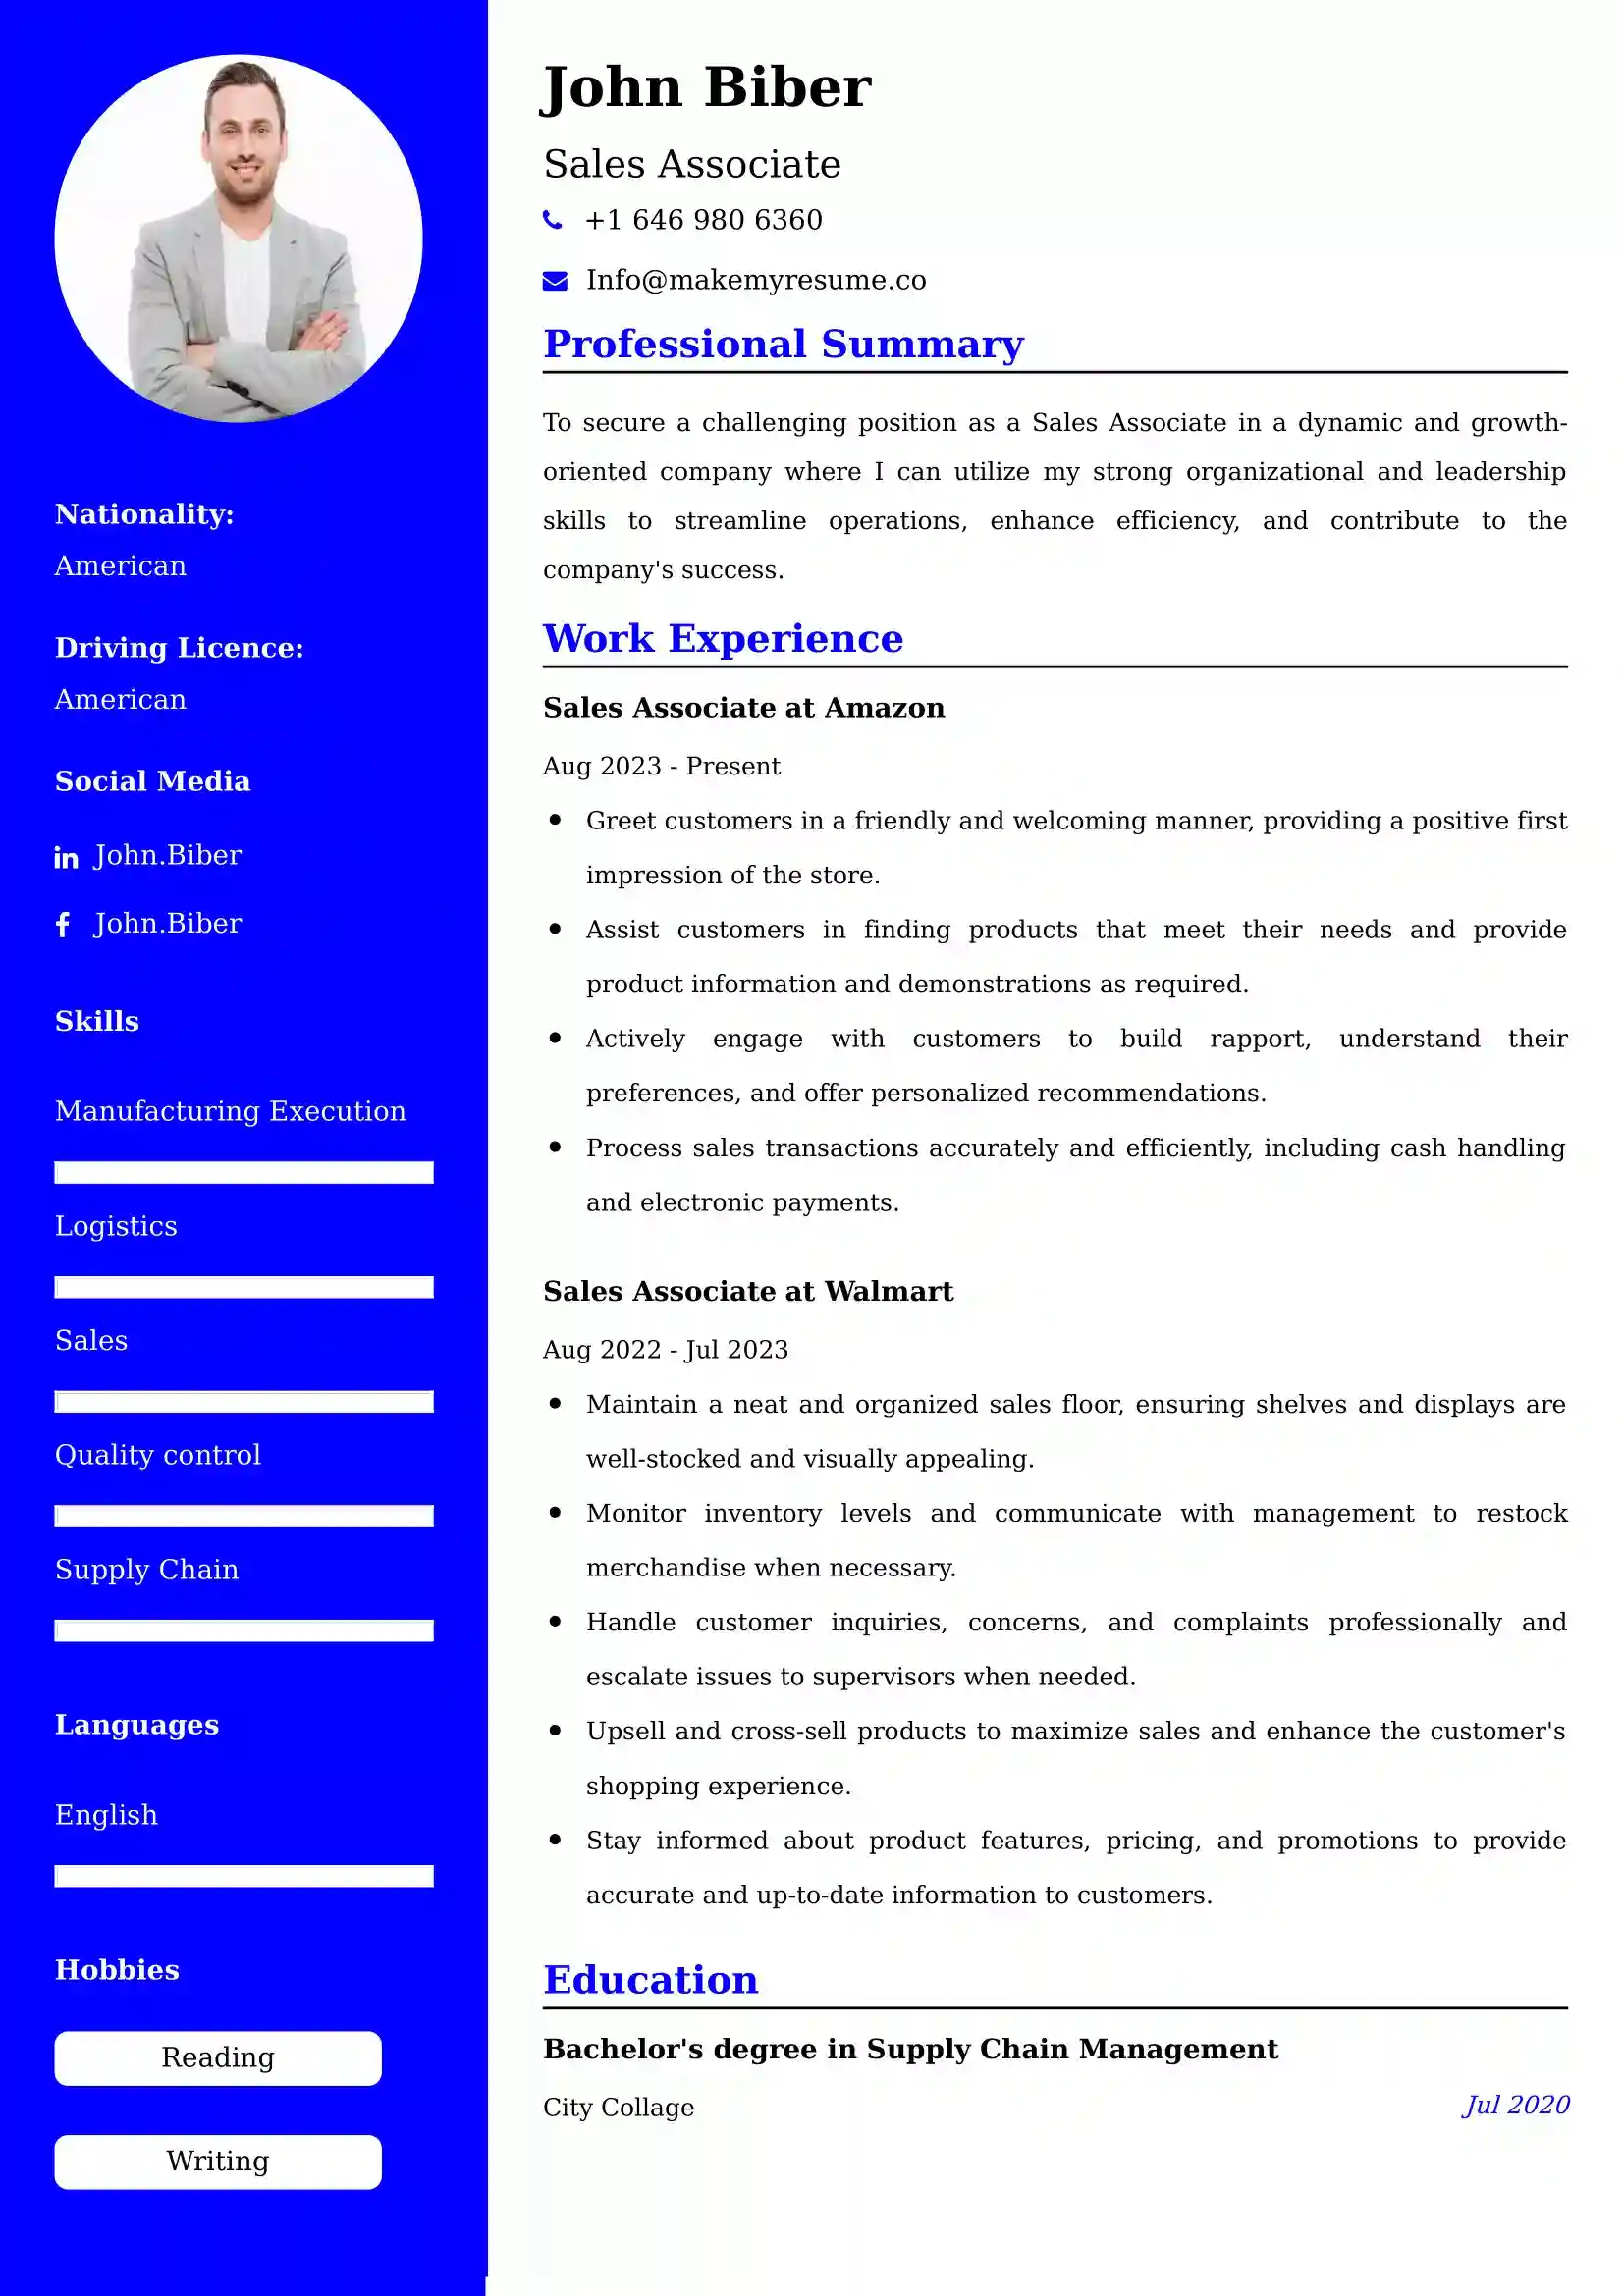 Sales Associate Resume Examples - UK Format, Latest Template.